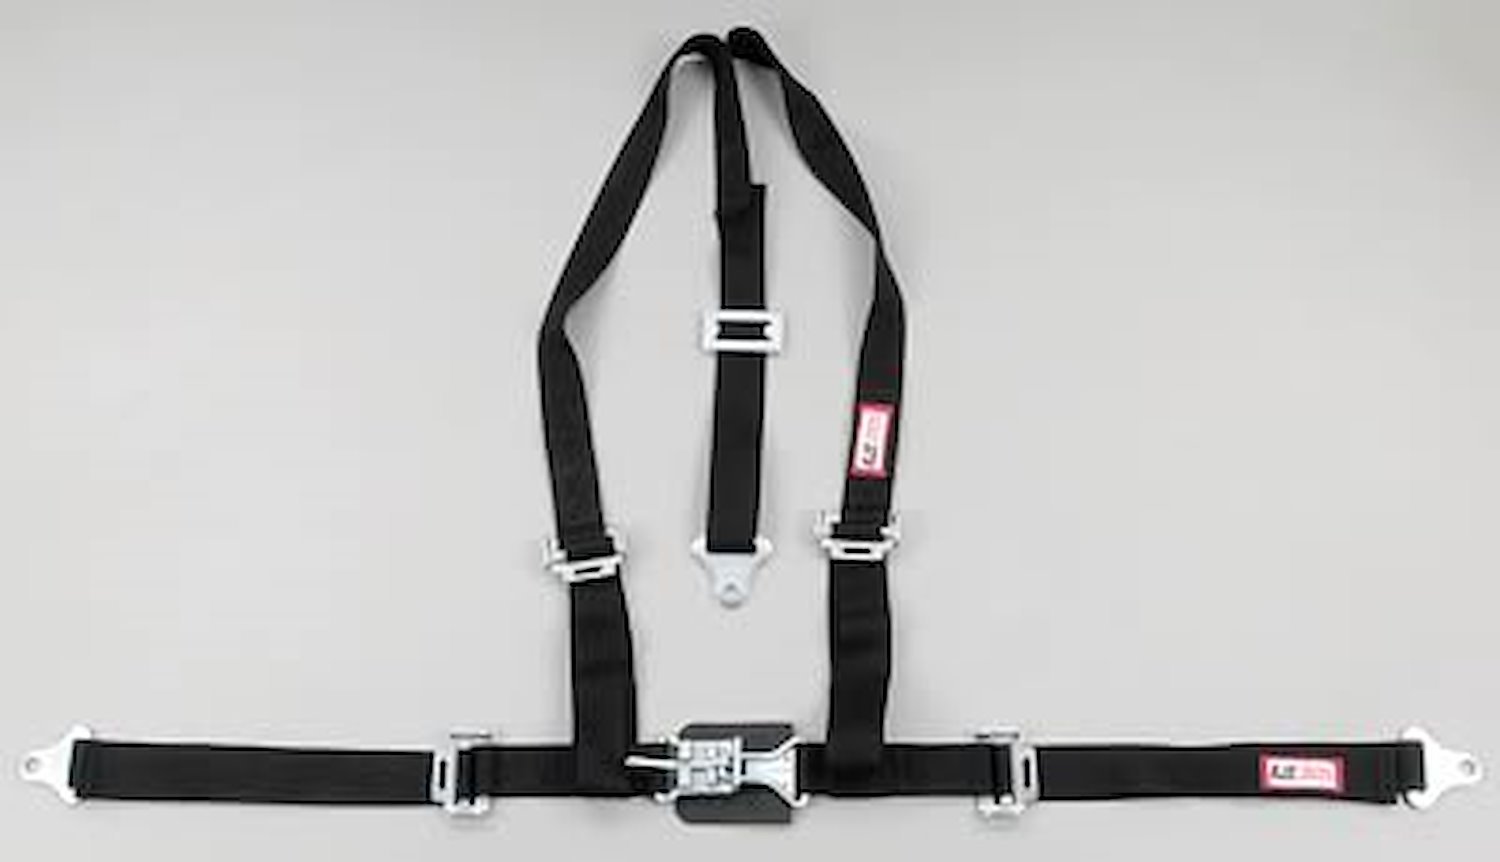 NON-SFI L&L HARNESS 2 PULL UP Lap Belt SEWN IN 2 S.H. Y FLOOR Mount w/STERNUM STRAP ALL WRAP ENDS ORANGE